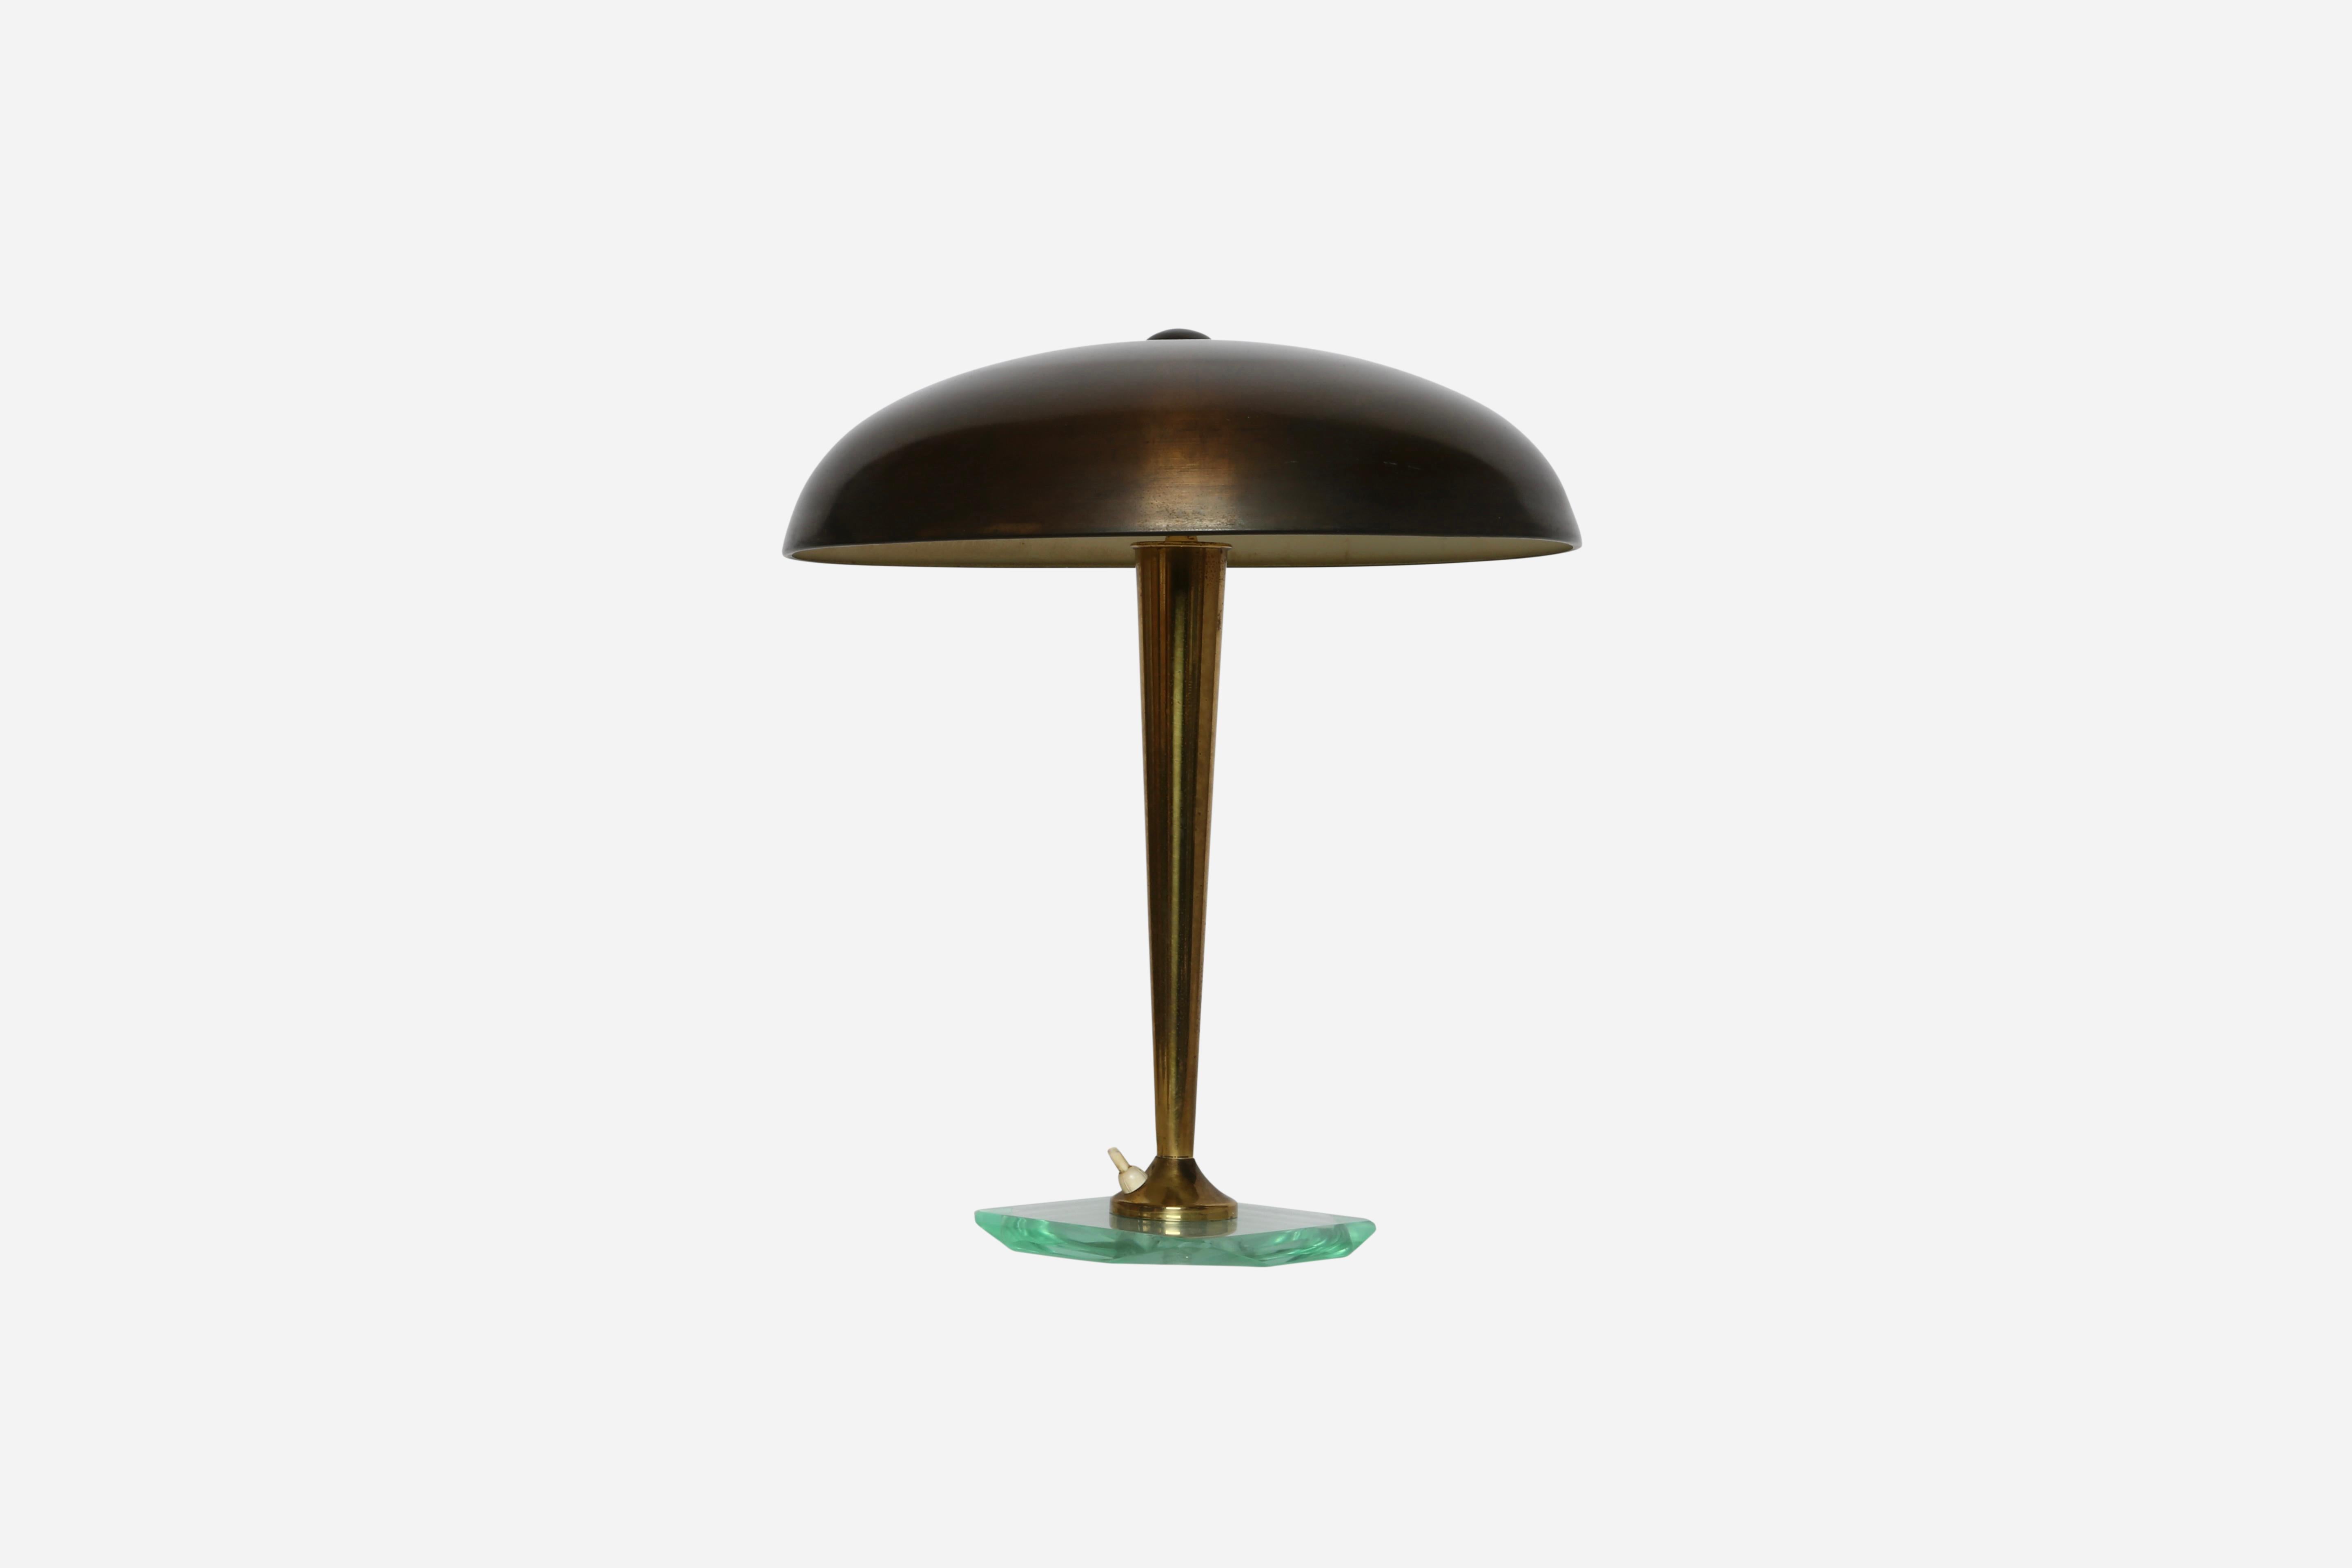 Pietro Chiesa for Fontana Arte table lamp
Designed and made in Italy in 1960s
Patinated brass shade, glass base.
2 candelabra sockets
Complimentary US rewiring upon request.

At Illustris Lighting our main focus is to deliver lighting fixtures to